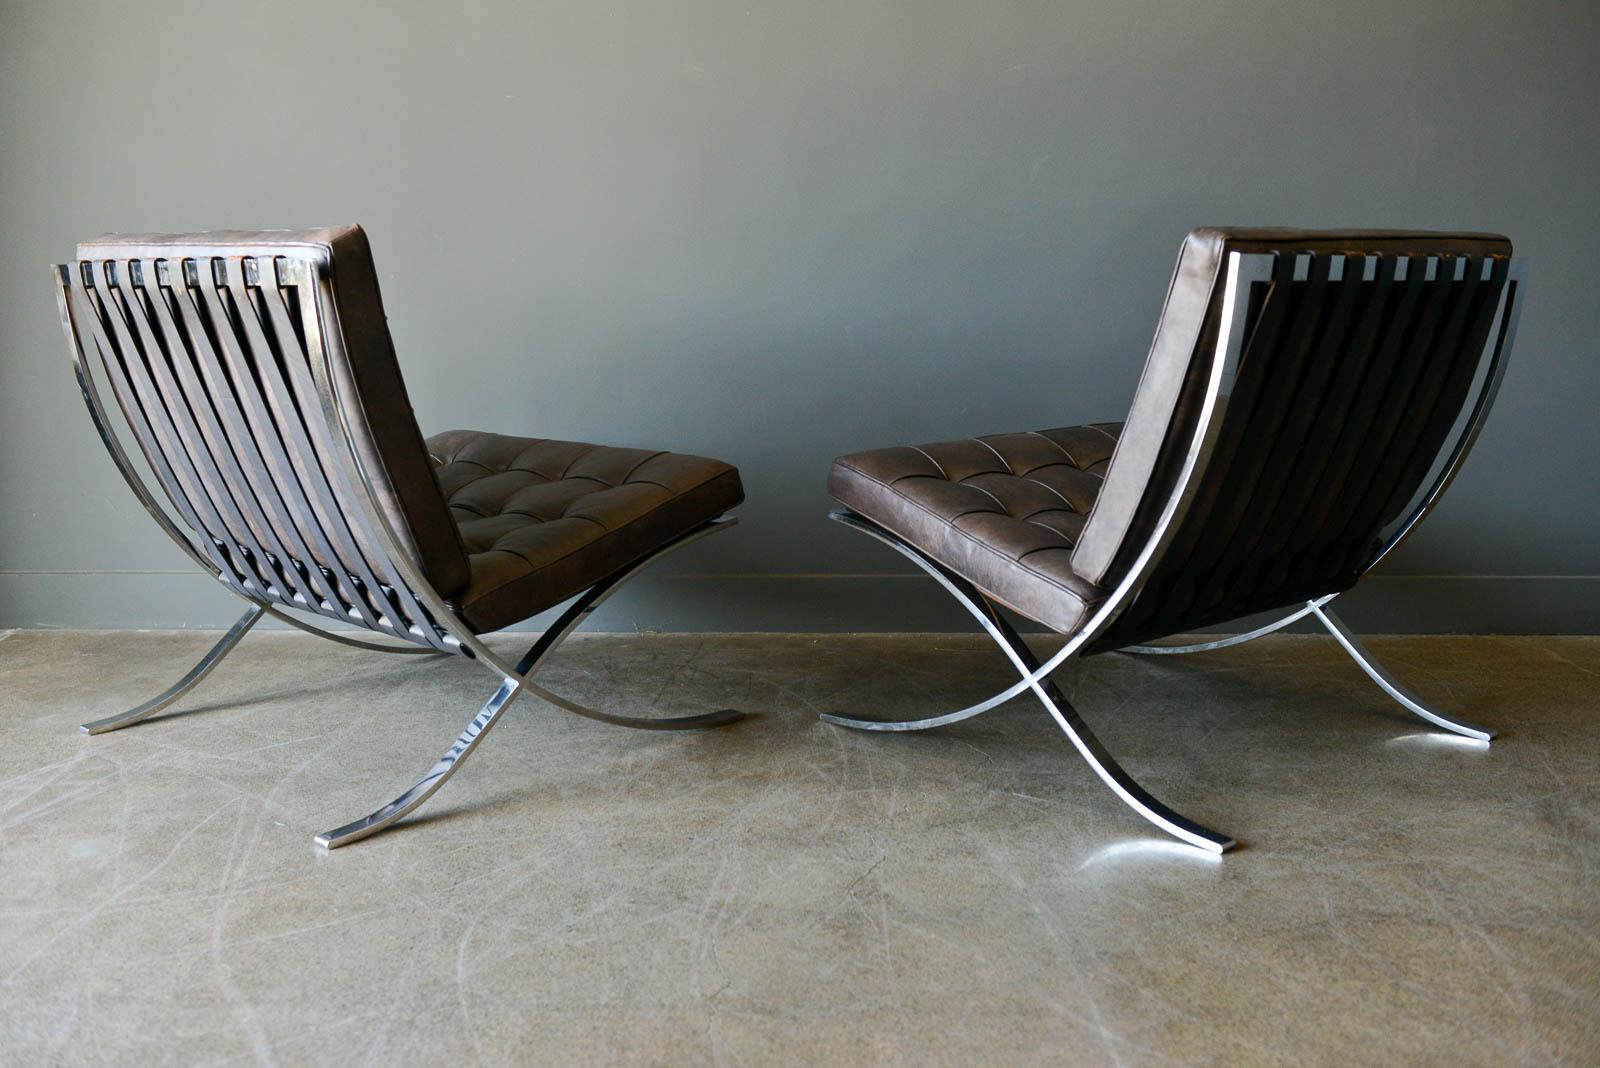 Rare Barcelona chairs by Gerald R. Griffith for Ludwig Mies van der Rohe, 1970. Signed by Gerald Griffith for Mies van der Rohe, 1970. Produced for a short period of time by this Chicago metal worker, these chairs feature sharper edges on the cross